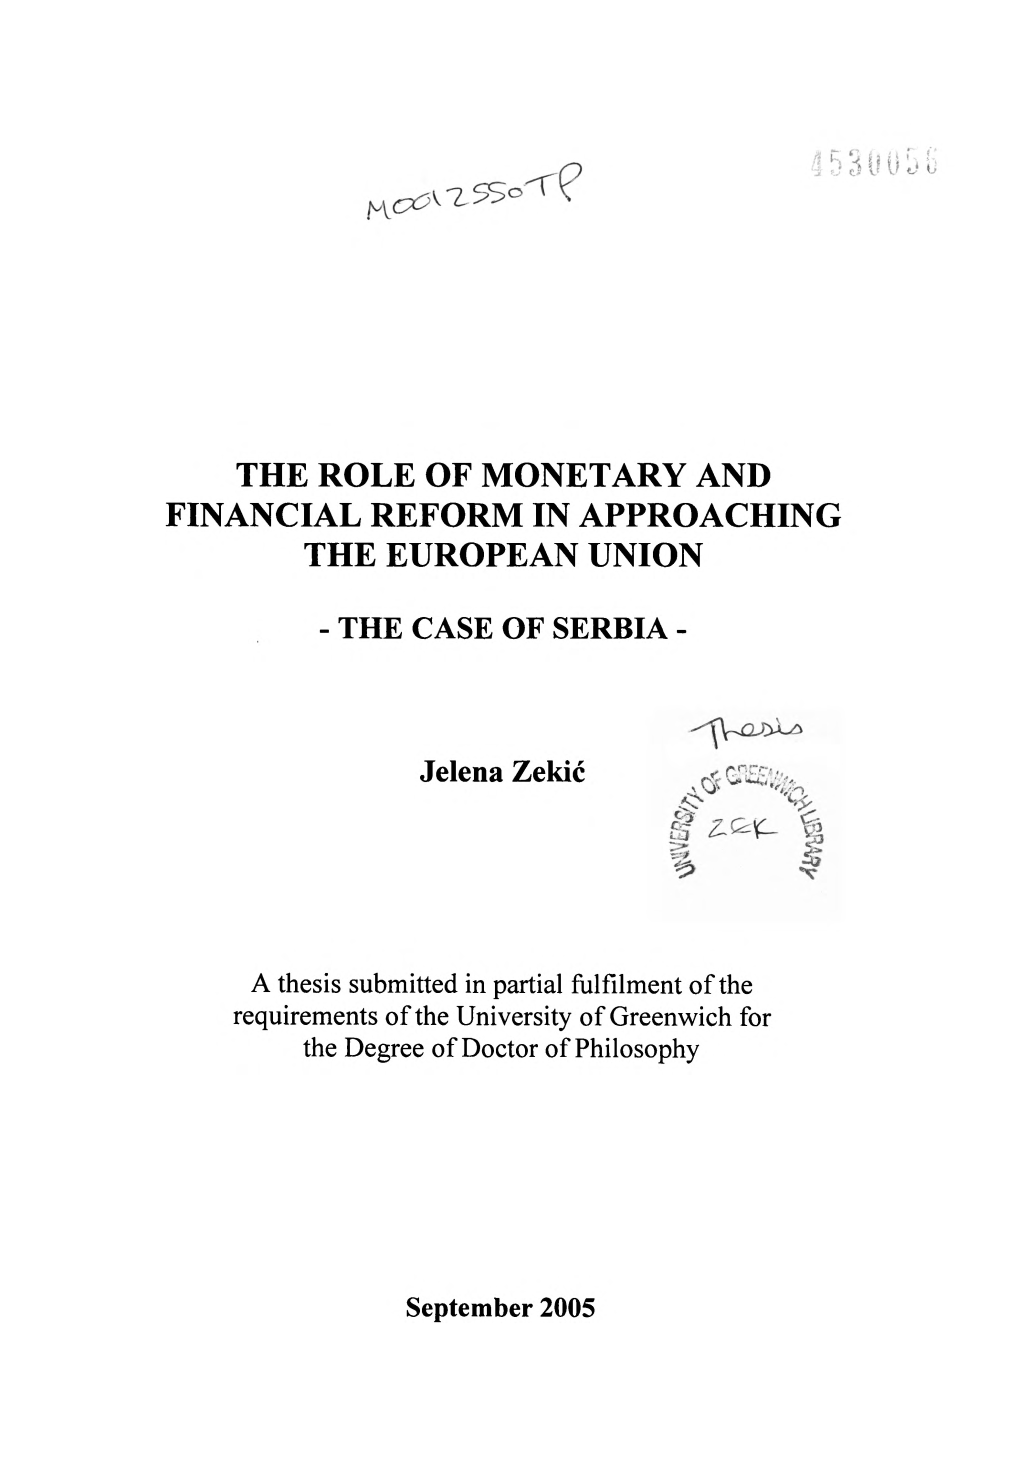 The Role of Monetary and Financial Reform in Approaching the European Union